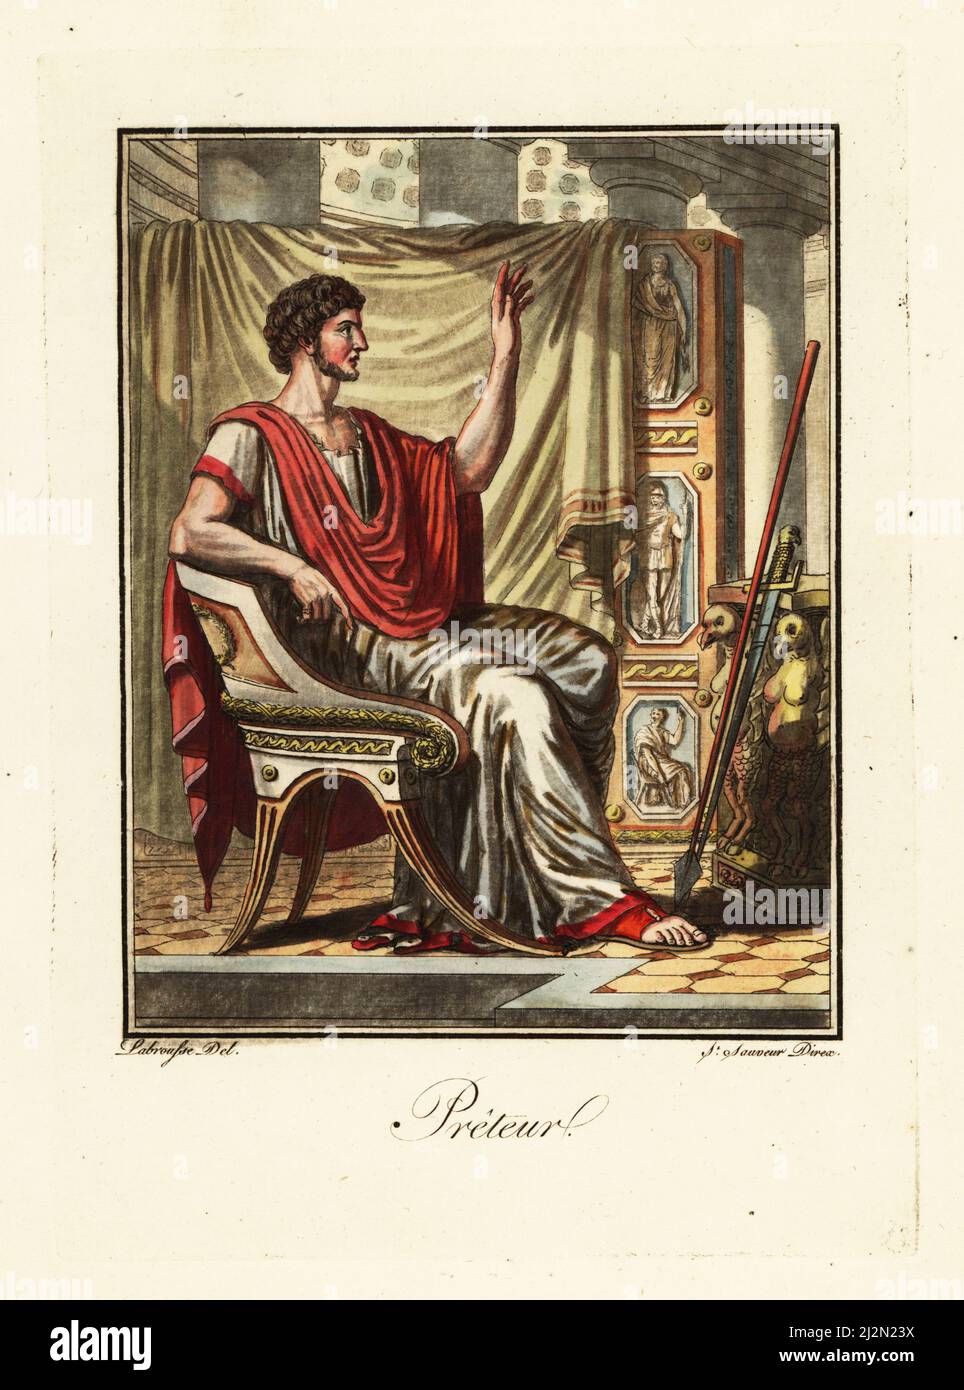 Costume of a praetor or magistrate, ancient Rome. In toga, tunic and sandals, seated on a chair in a room decorated with screen, spear, sword, carved table. Preteur. Handcoloured copperplate drawn and engraved by L. Labrousse, artist of Bordeaux, under the direction of Jacques Grasset de Saint-Sauveur from his L’antique Rome, ou description historique et pittoresque, Ancient Rome, or historical and picturesque description, Chez Deroy, Paris, 1796. Stock Photo